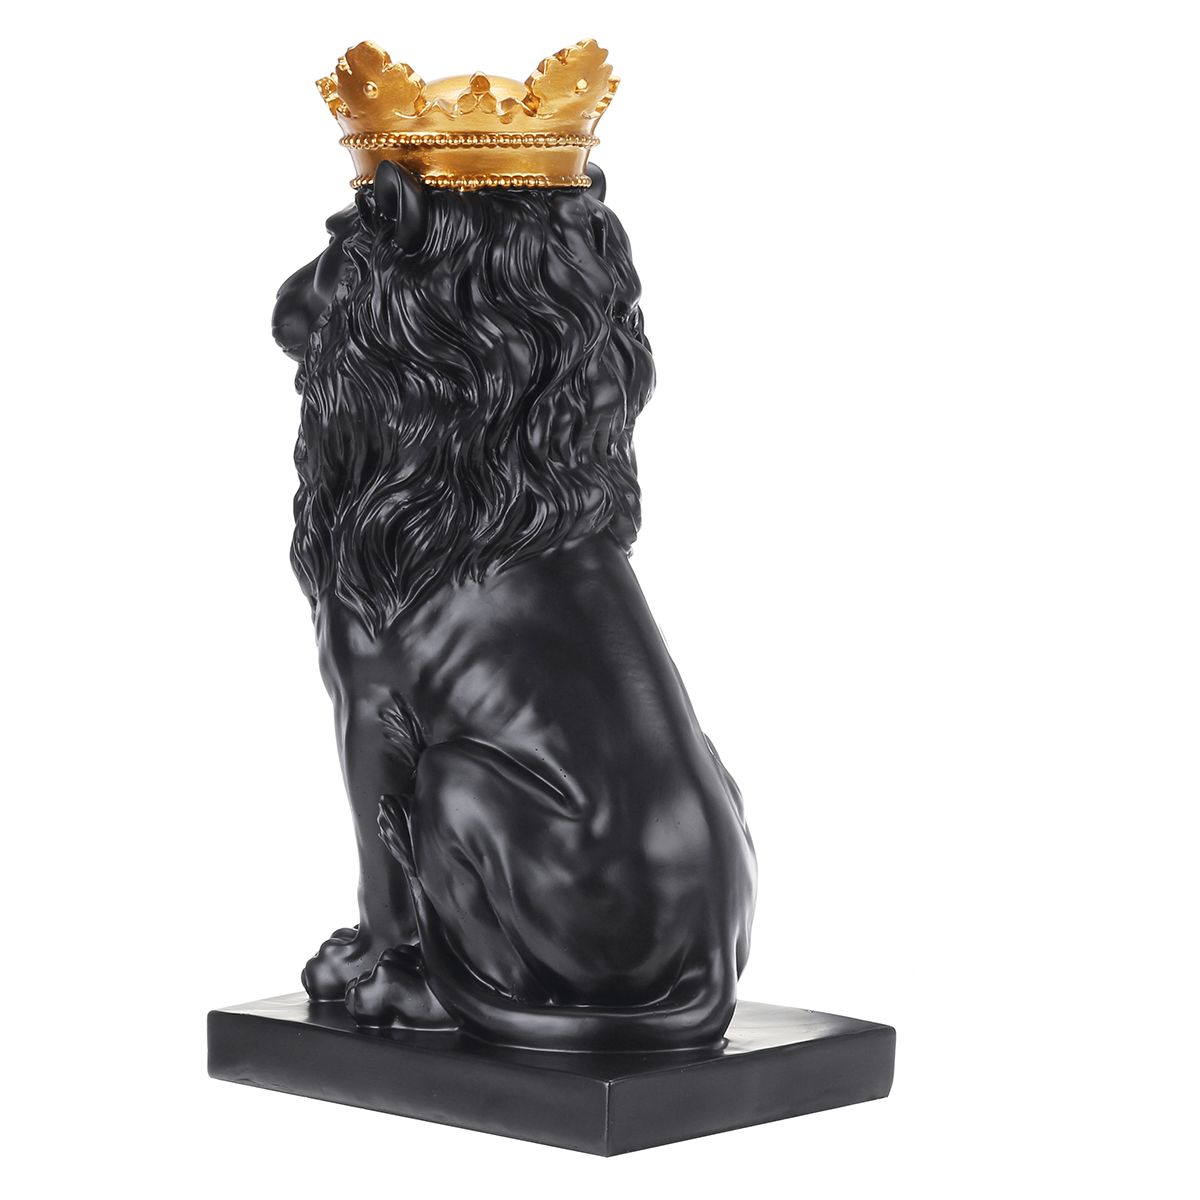 Nordic-Style-Crown-Lion-Statue-Handicraft-Decorations-for-Home-Office-Hotel-Desk-1632237